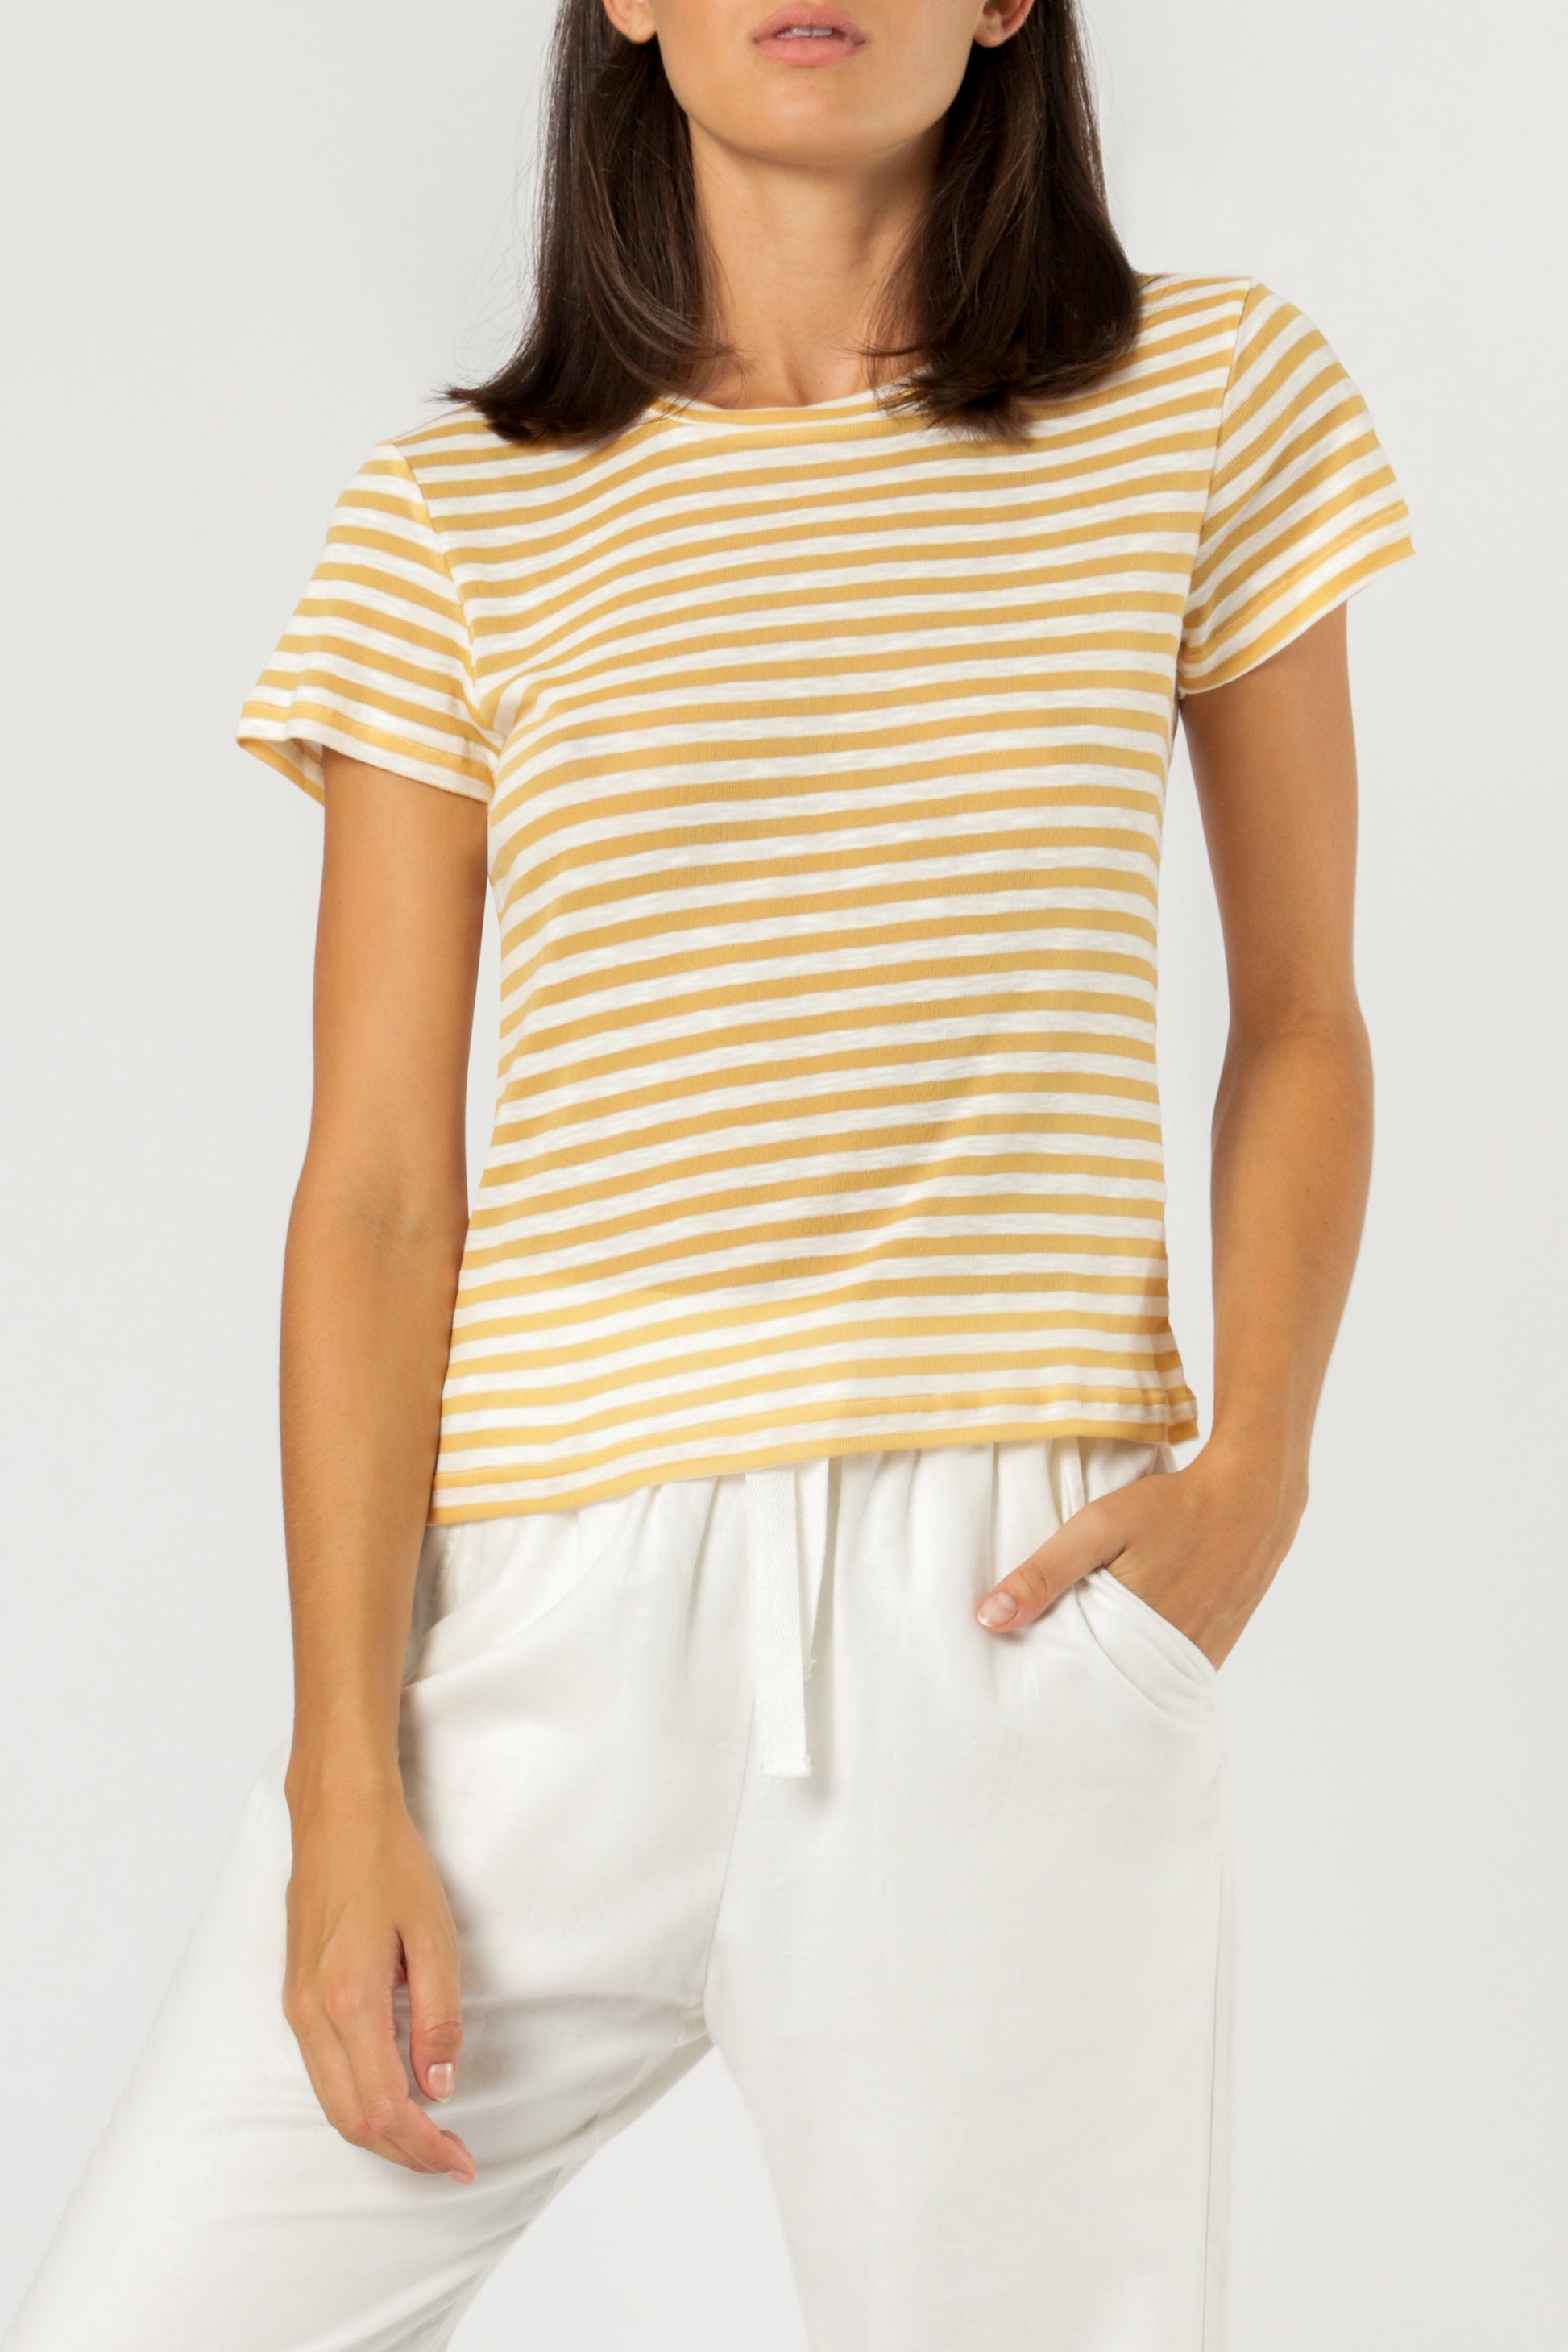 Nude Lucy Florence Tee Mustard Stripe T Shirt 